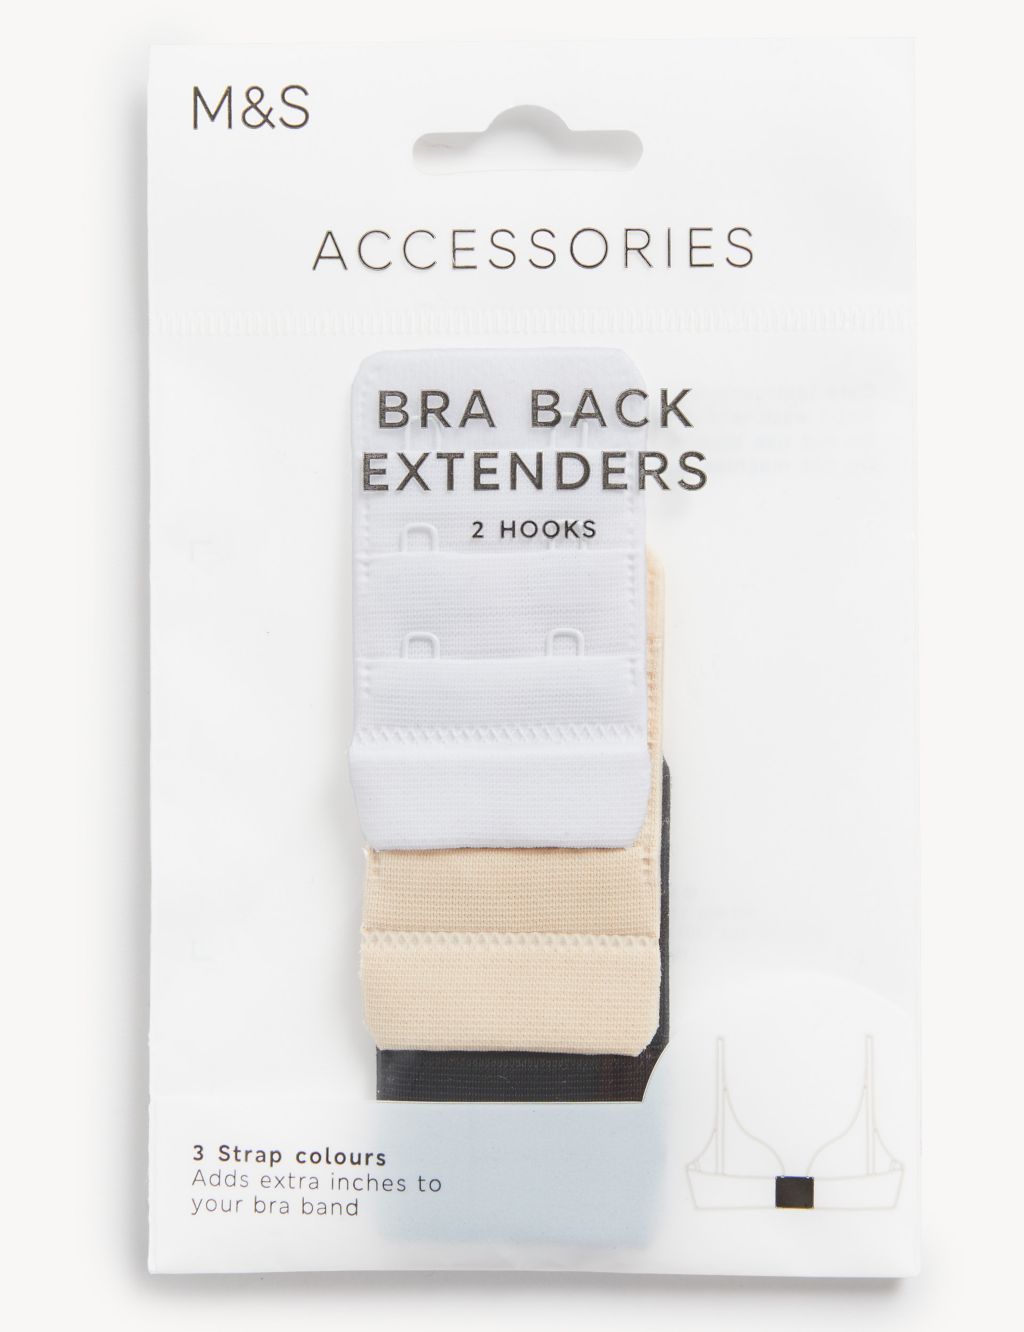 Bra back band Extenders available in 3 colors and 5 hook sizes